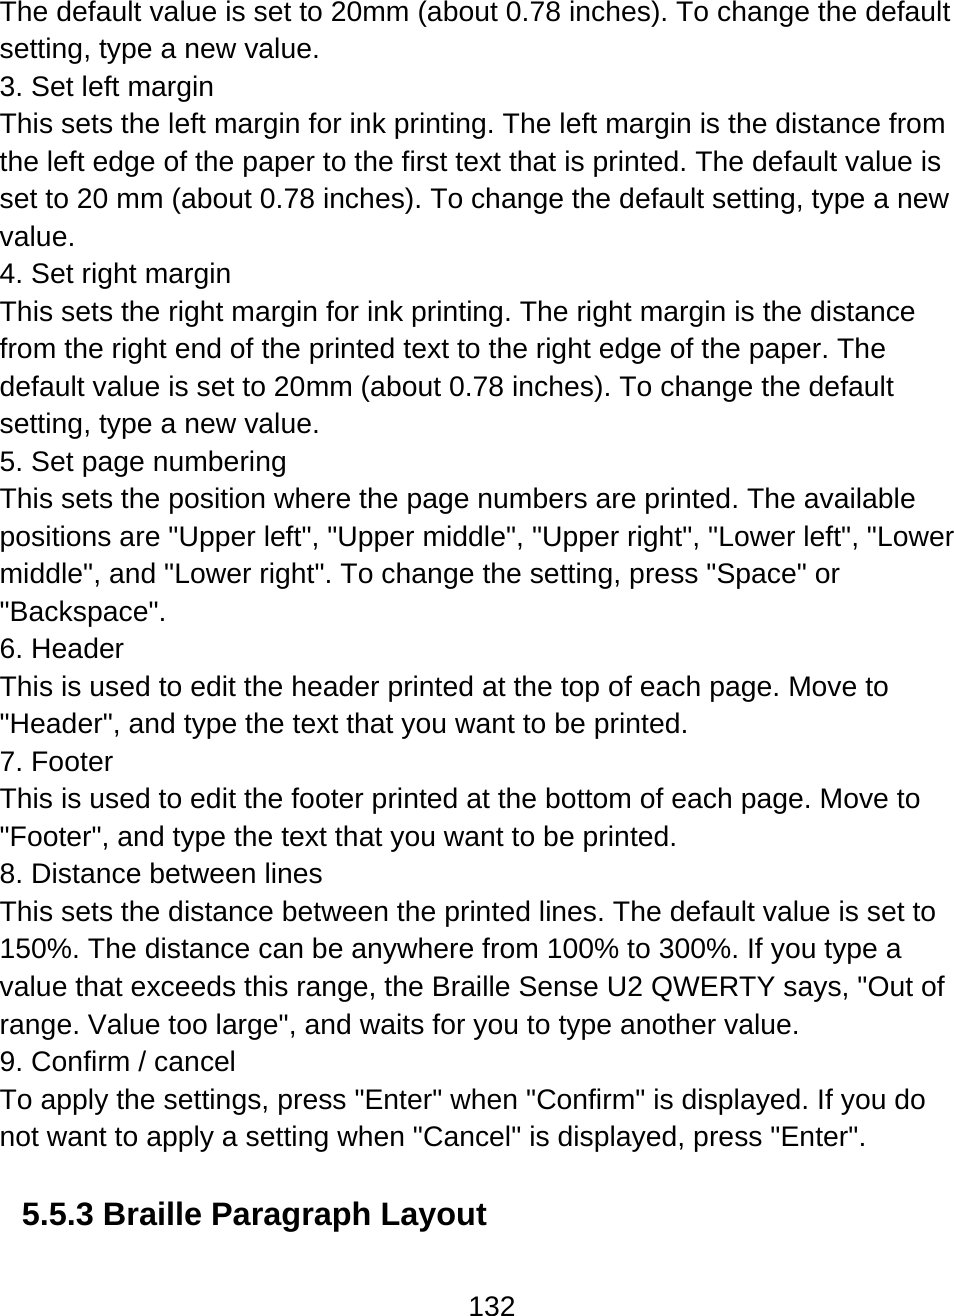 132  The default value is set to 20mm (about 0.78 inches). To change the default setting, type a new value. 3. Set left margin This sets the left margin for ink printing. The left margin is the distance from the left edge of the paper to the first text that is printed. The default value is set to 20 mm (about 0.78 inches). To change the default setting, type a new value. 4. Set right margin This sets the right margin for ink printing. The right margin is the distance from the right end of the printed text to the right edge of the paper. The default value is set to 20mm (about 0.78 inches). To change the default setting, type a new value. 5. Set page numbering This sets the position where the page numbers are printed. The available positions are &quot;Upper left&quot;, &quot;Upper middle&quot;, &quot;Upper right&quot;, &quot;Lower left&quot;, &quot;Lower middle&quot;, and &quot;Lower right&quot;. To change the setting, press &quot;Space&quot; or &quot;Backspace&quot;.  6. Header This is used to edit the header printed at the top of each page. Move to &quot;Header&quot;, and type the text that you want to be printed. 7. Footer This is used to edit the footer printed at the bottom of each page. Move to &quot;Footer&quot;, and type the text that you want to be printed. 8. Distance between lines This sets the distance between the printed lines. The default value is set to 150%. The distance can be anywhere from 100% to 300%. If you type a value that exceeds this range, the Braille Sense U2 QWERTY says, &quot;Out of range. Value too large&quot;, and waits for you to type another value. 9. Confirm / cancel To apply the settings, press &quot;Enter&quot; when &quot;Confirm&quot; is displayed. If you do not want to apply a setting when &quot;Cancel&quot; is displayed, press &quot;Enter&quot;.   5.5.3 Braille Paragraph Layout   